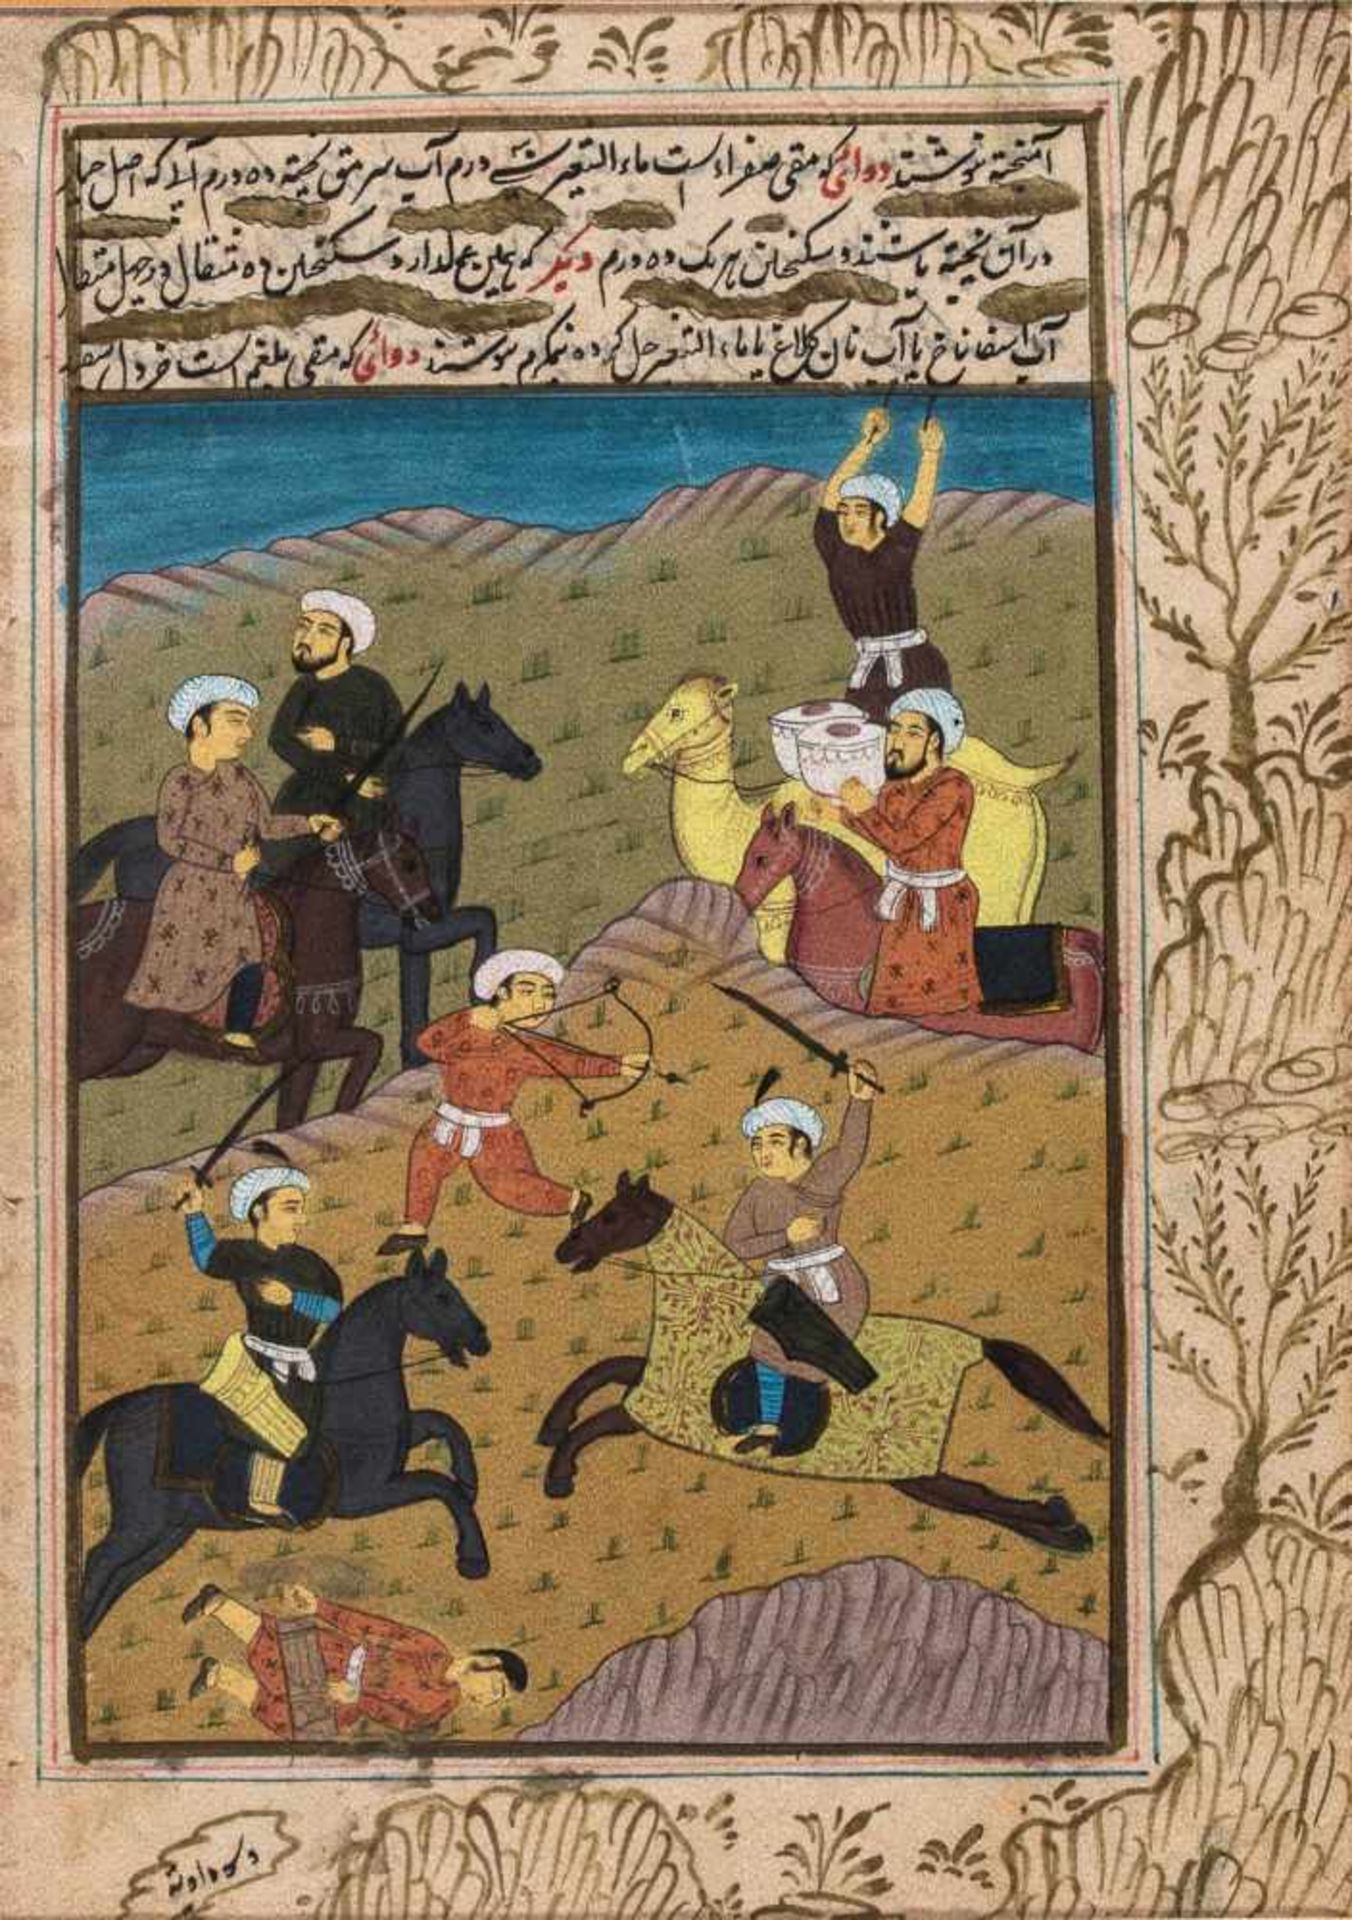 A MINIATURE PAINTING OF A BATTLE SCENE- 19th CENTURYMiniature painting with colors and gold on